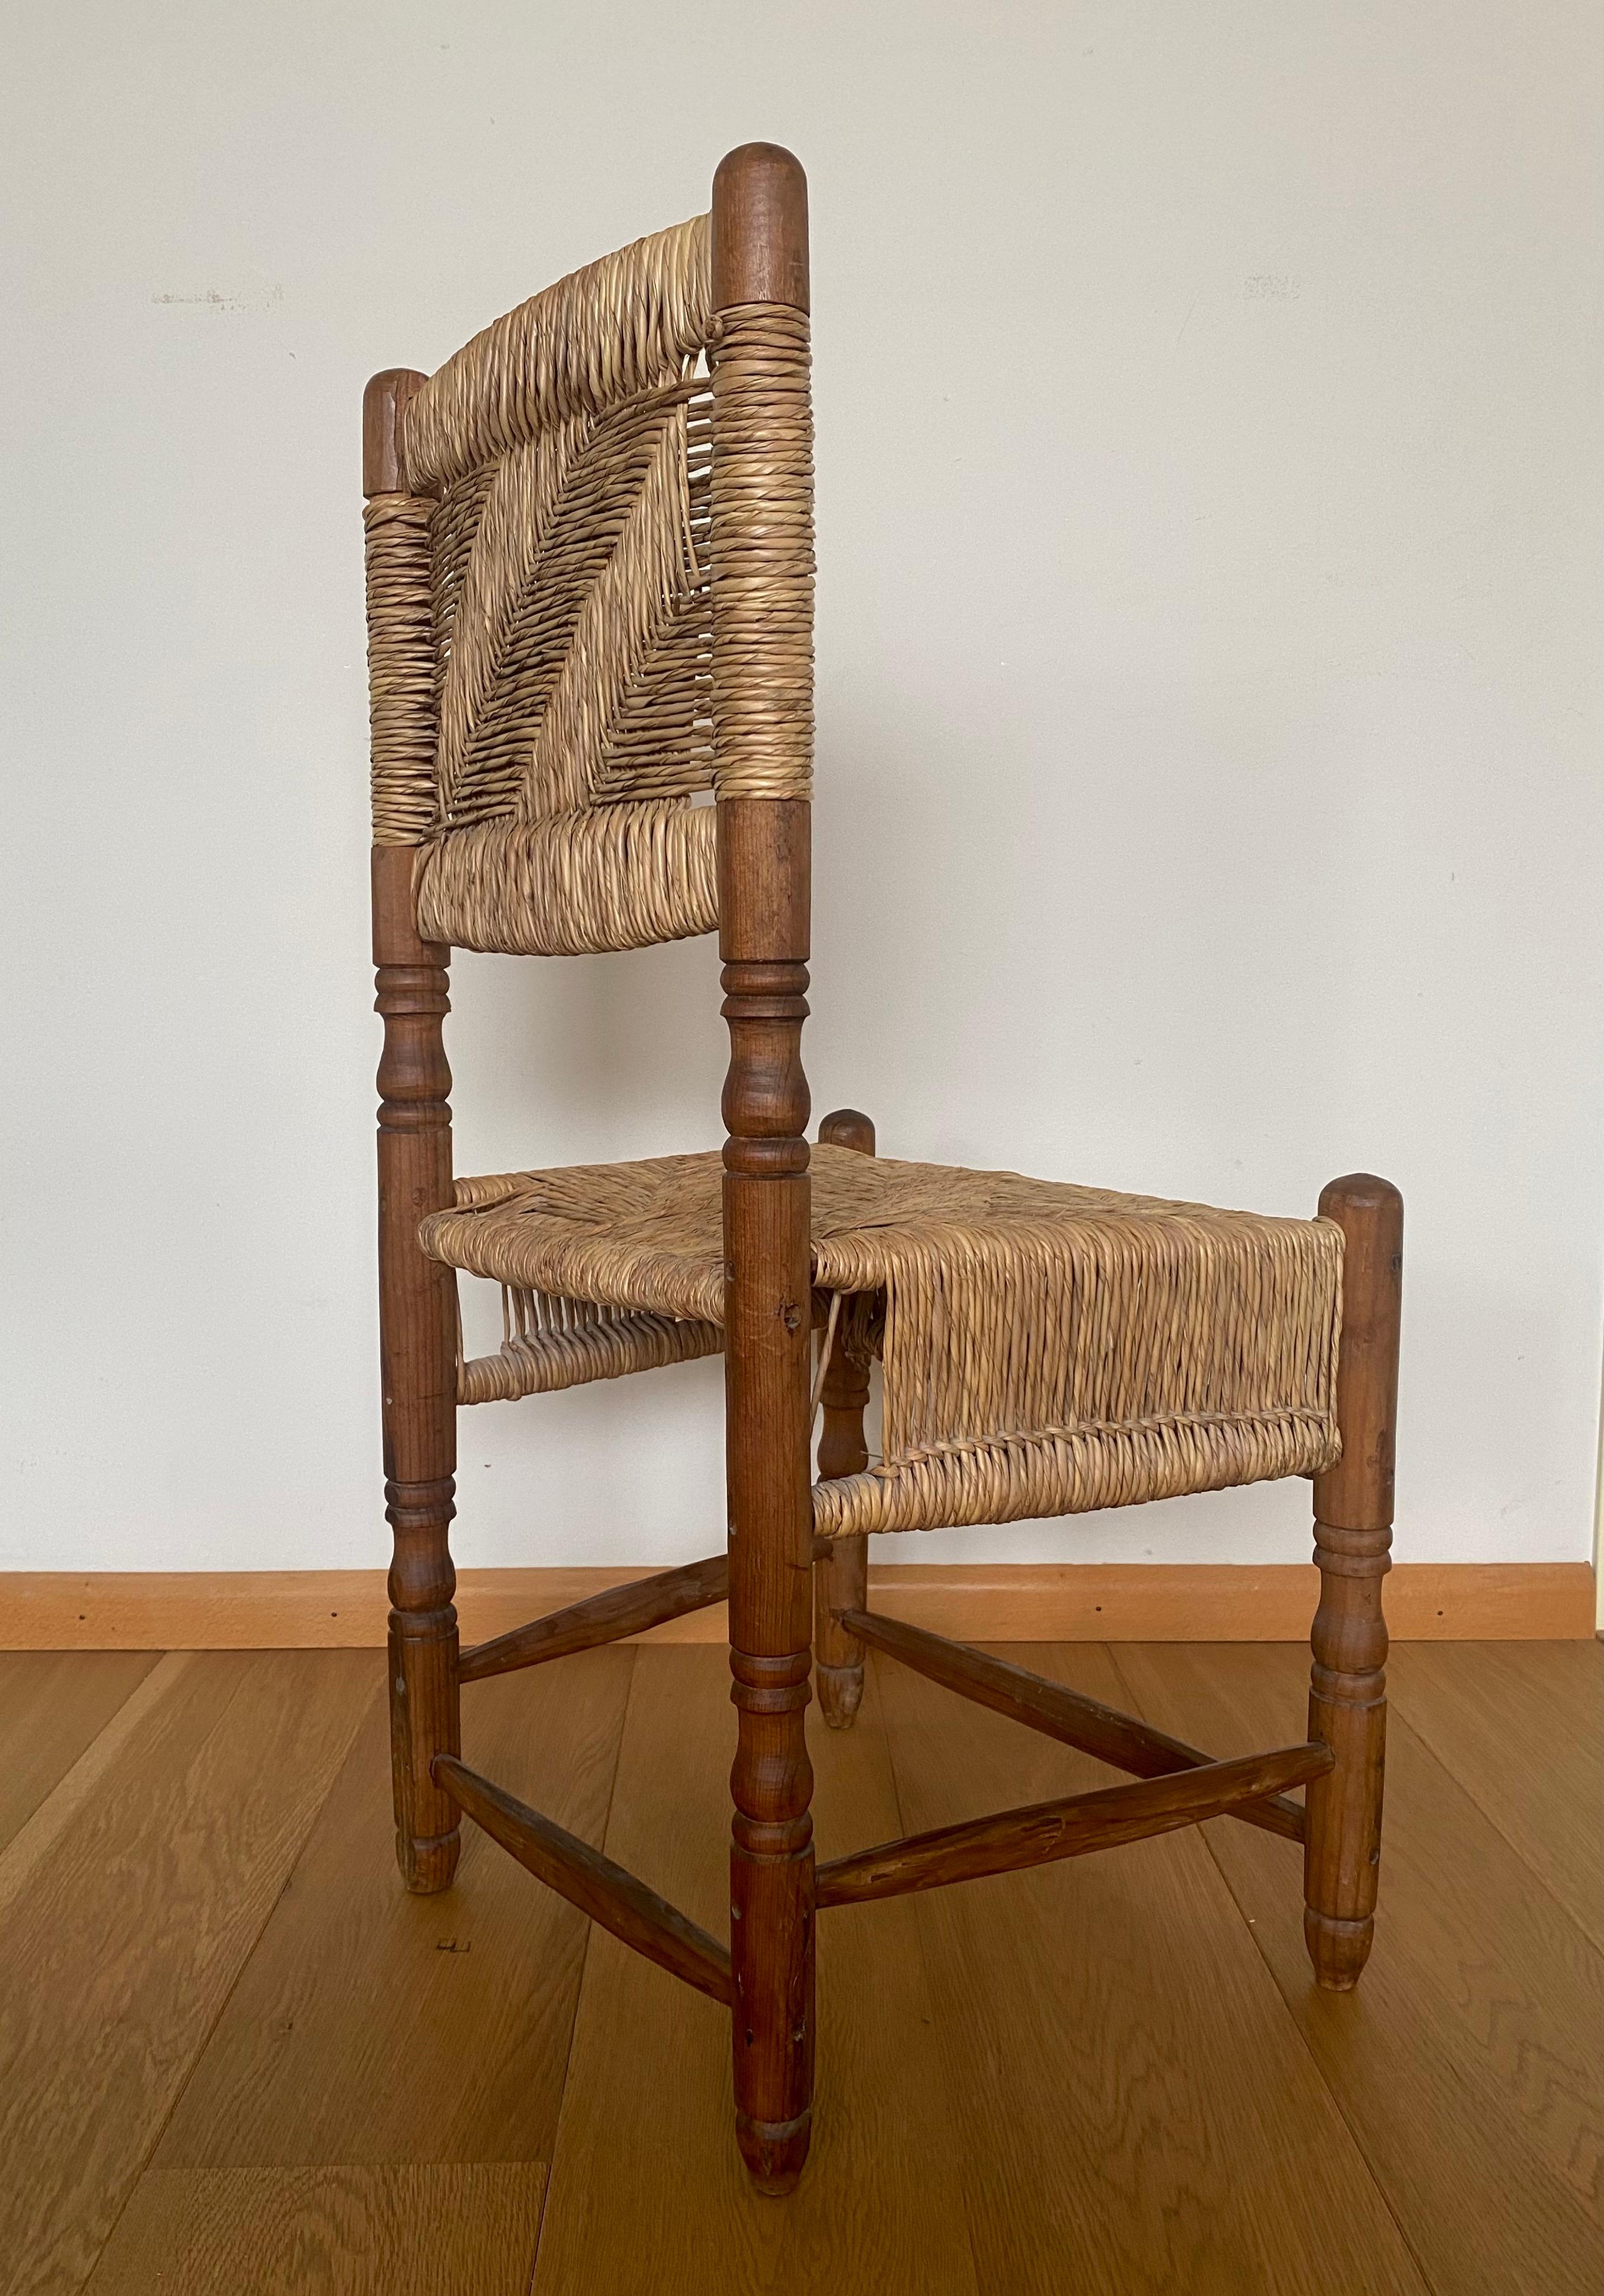 North American Rustic, Vintage, Wooden Chair with Woven Seat For Sale 2